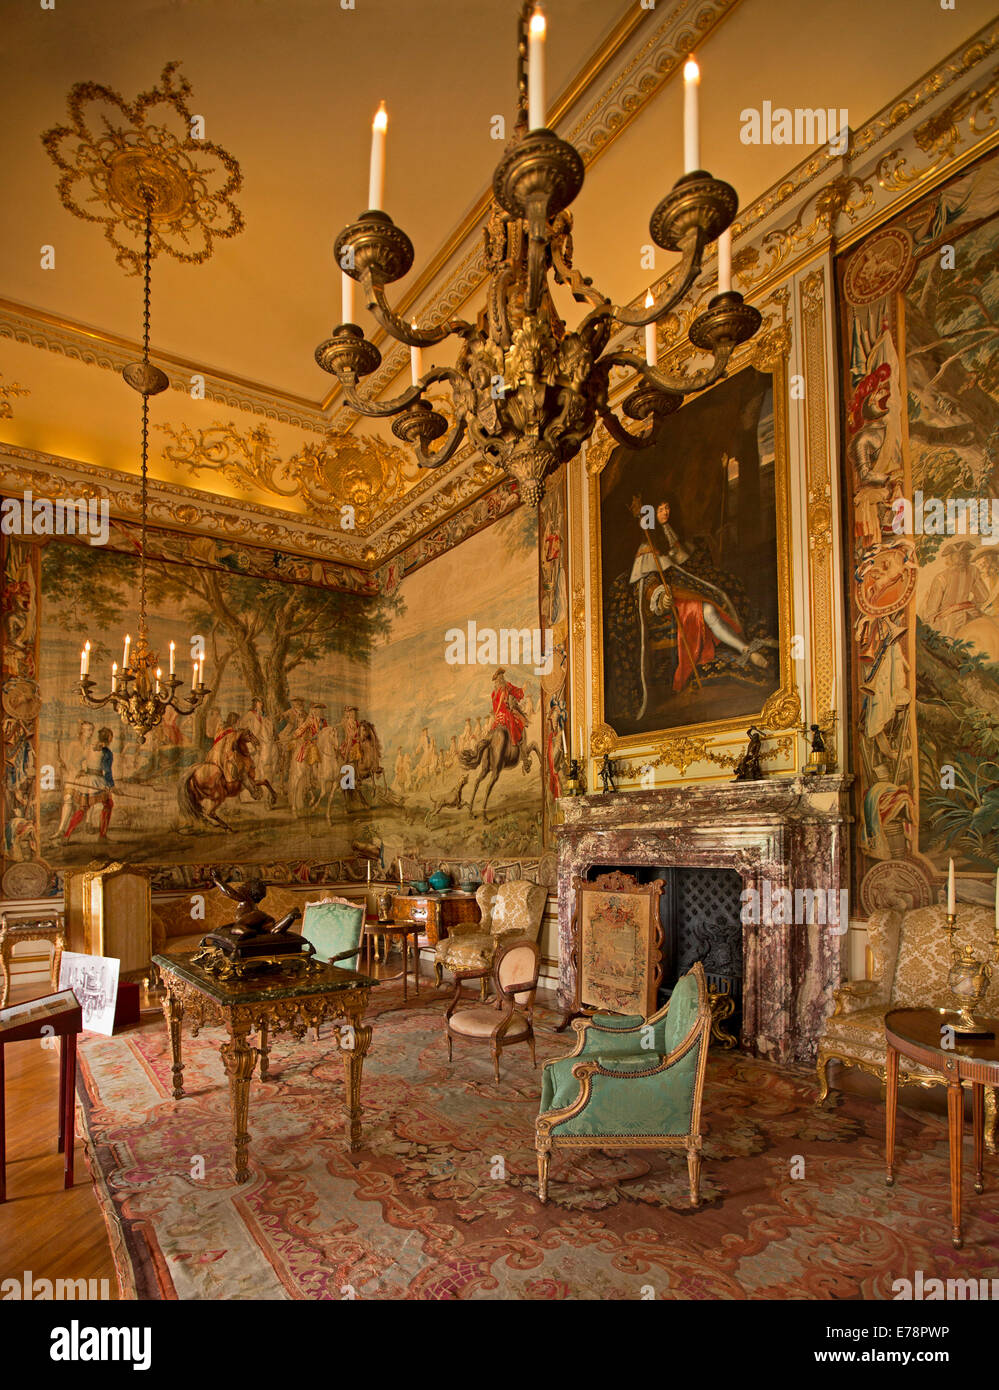 Grand interior room with immense paintings,luxurious furnishings, chandelier and ornate ceiling at Blenheim Palace, England Stock Photo